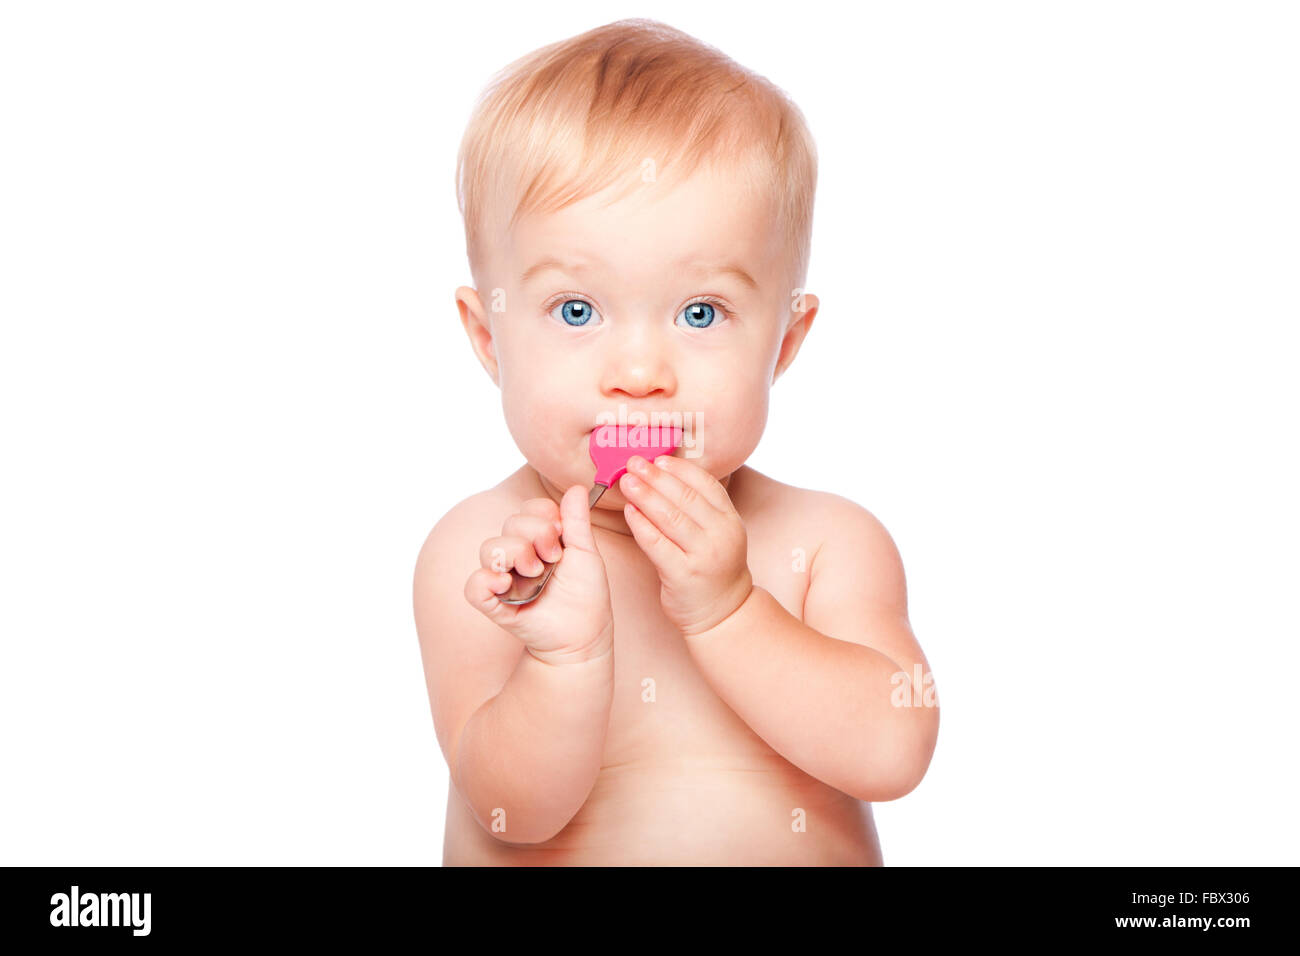 Cute baby with food spon in mouth Stock Photo